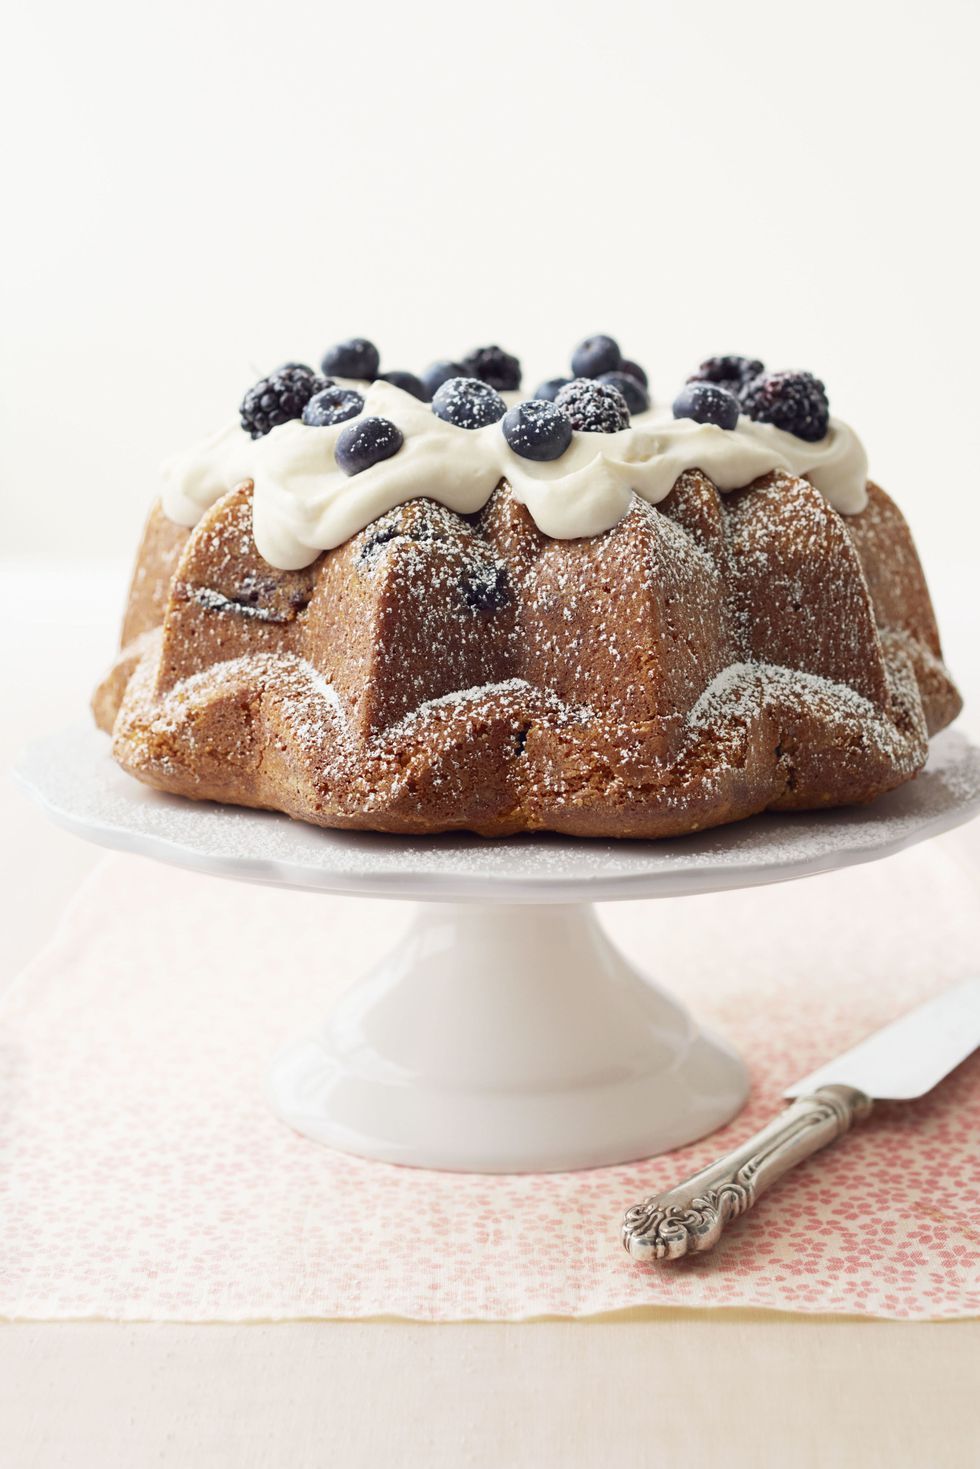 lemon curd bundt cake with frosting and blueberries on top